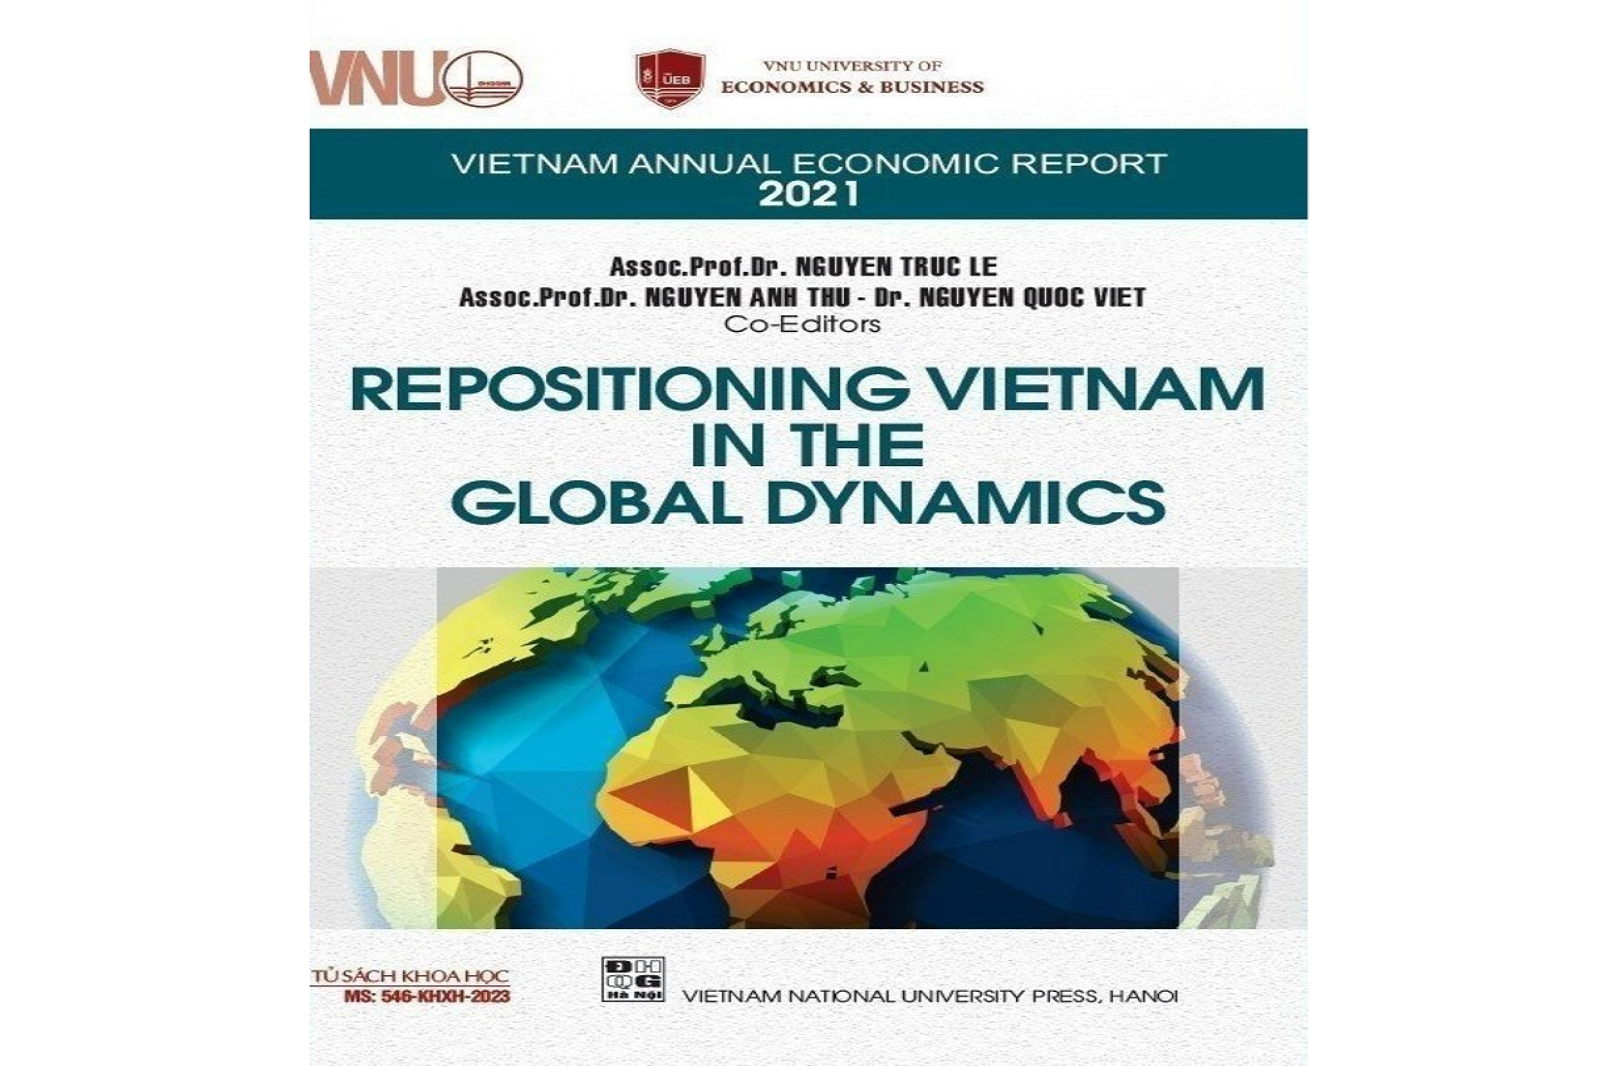 Repositioning Vietnam in the Global Dynamics